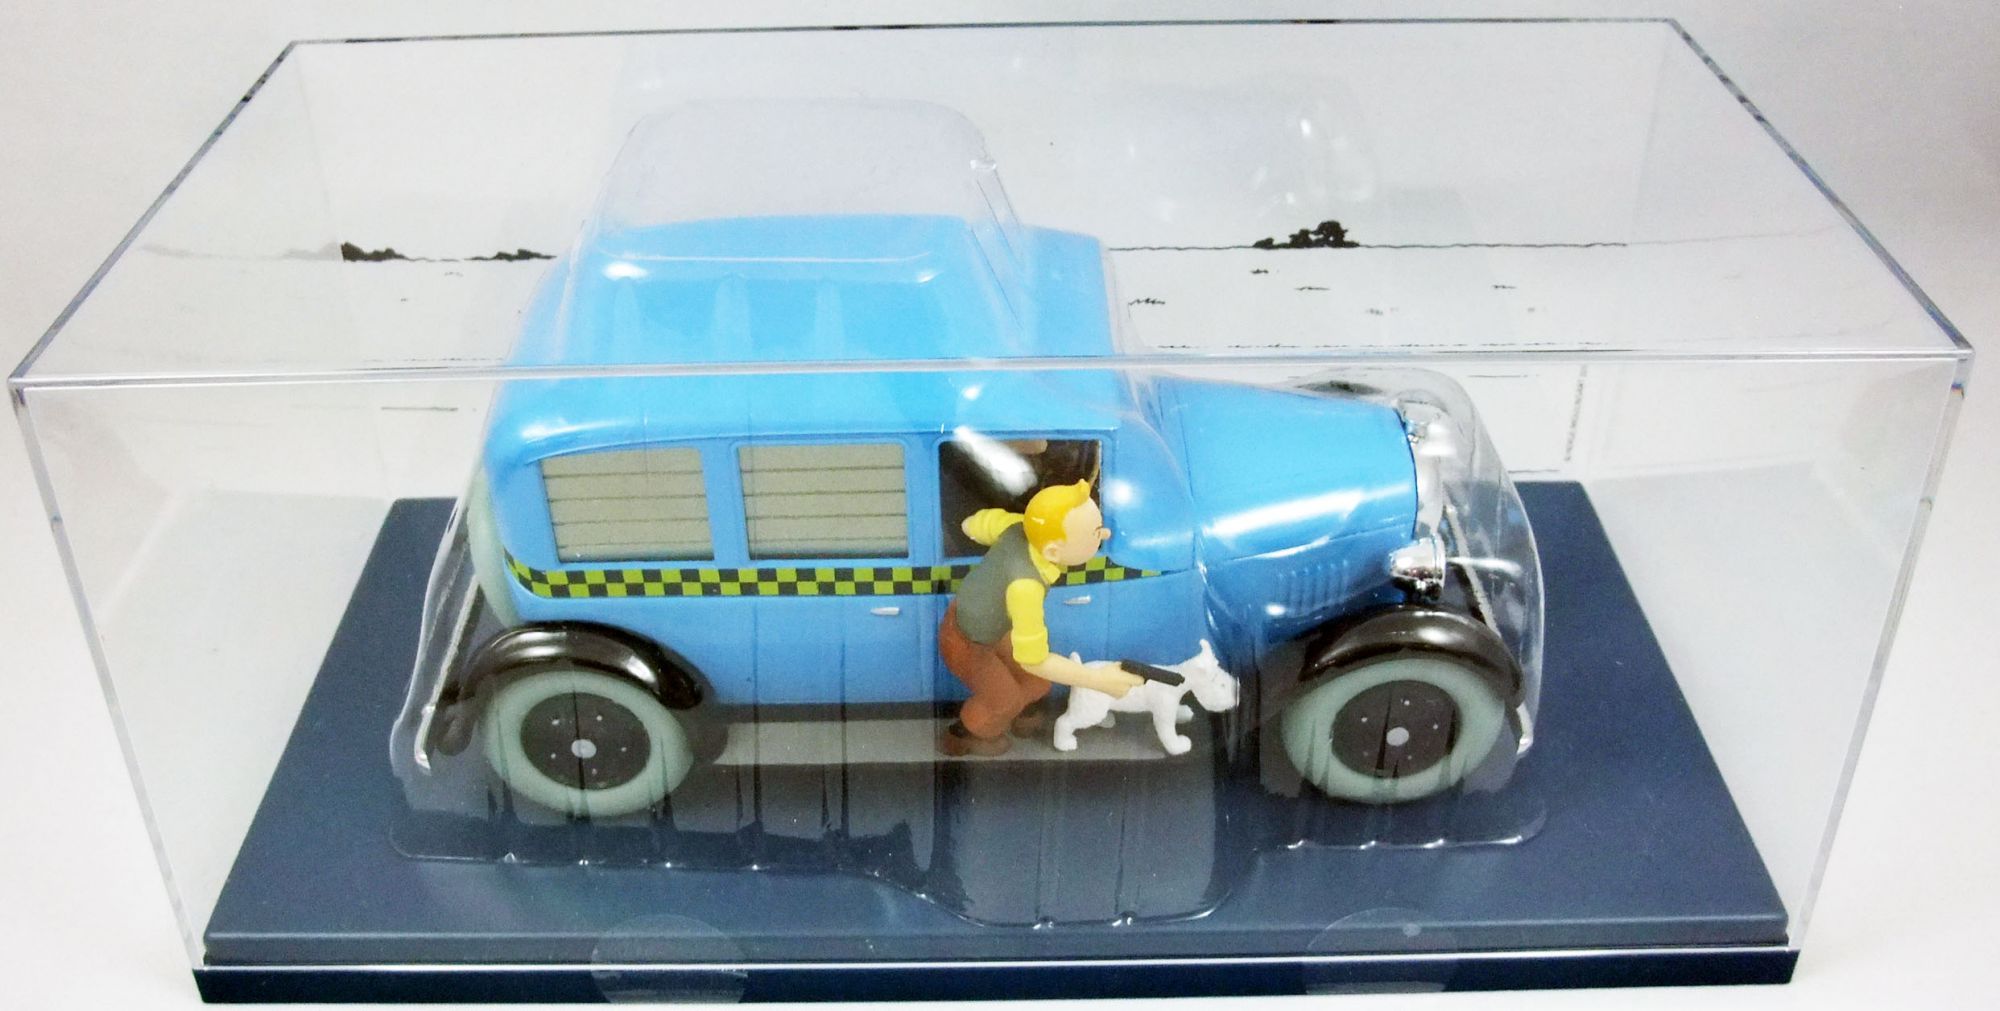 The Cars of Tintin (1:24 scale) - Hachette - #07 Chicago Taxi Cab